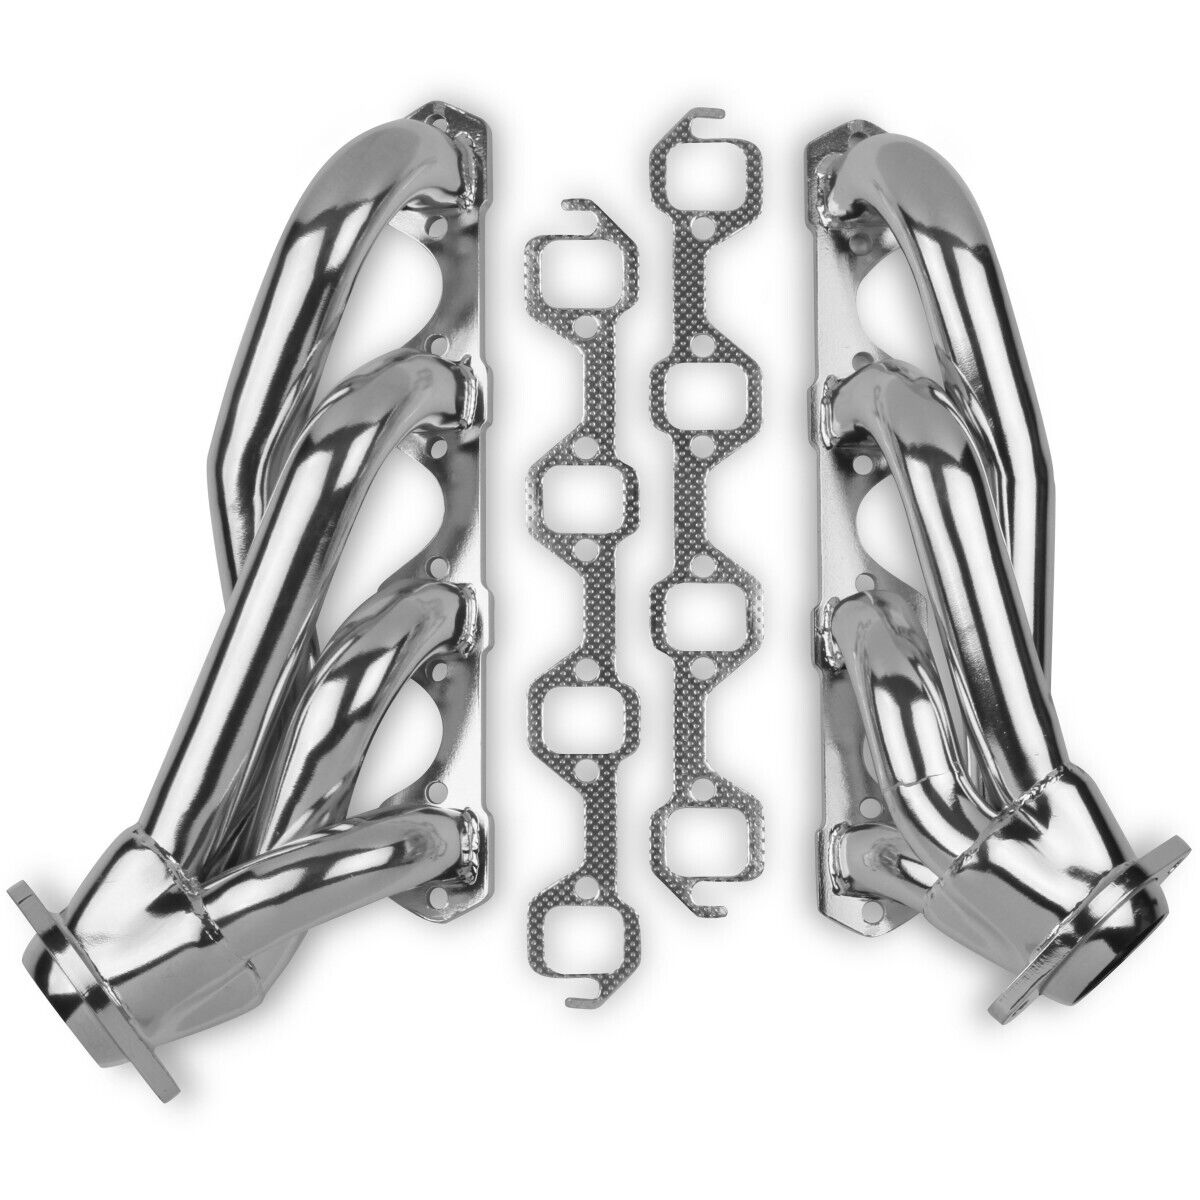 32103FLT Flowtech Set of 2 Headers for Falcon Ford Mustang Mercury Montego Pair